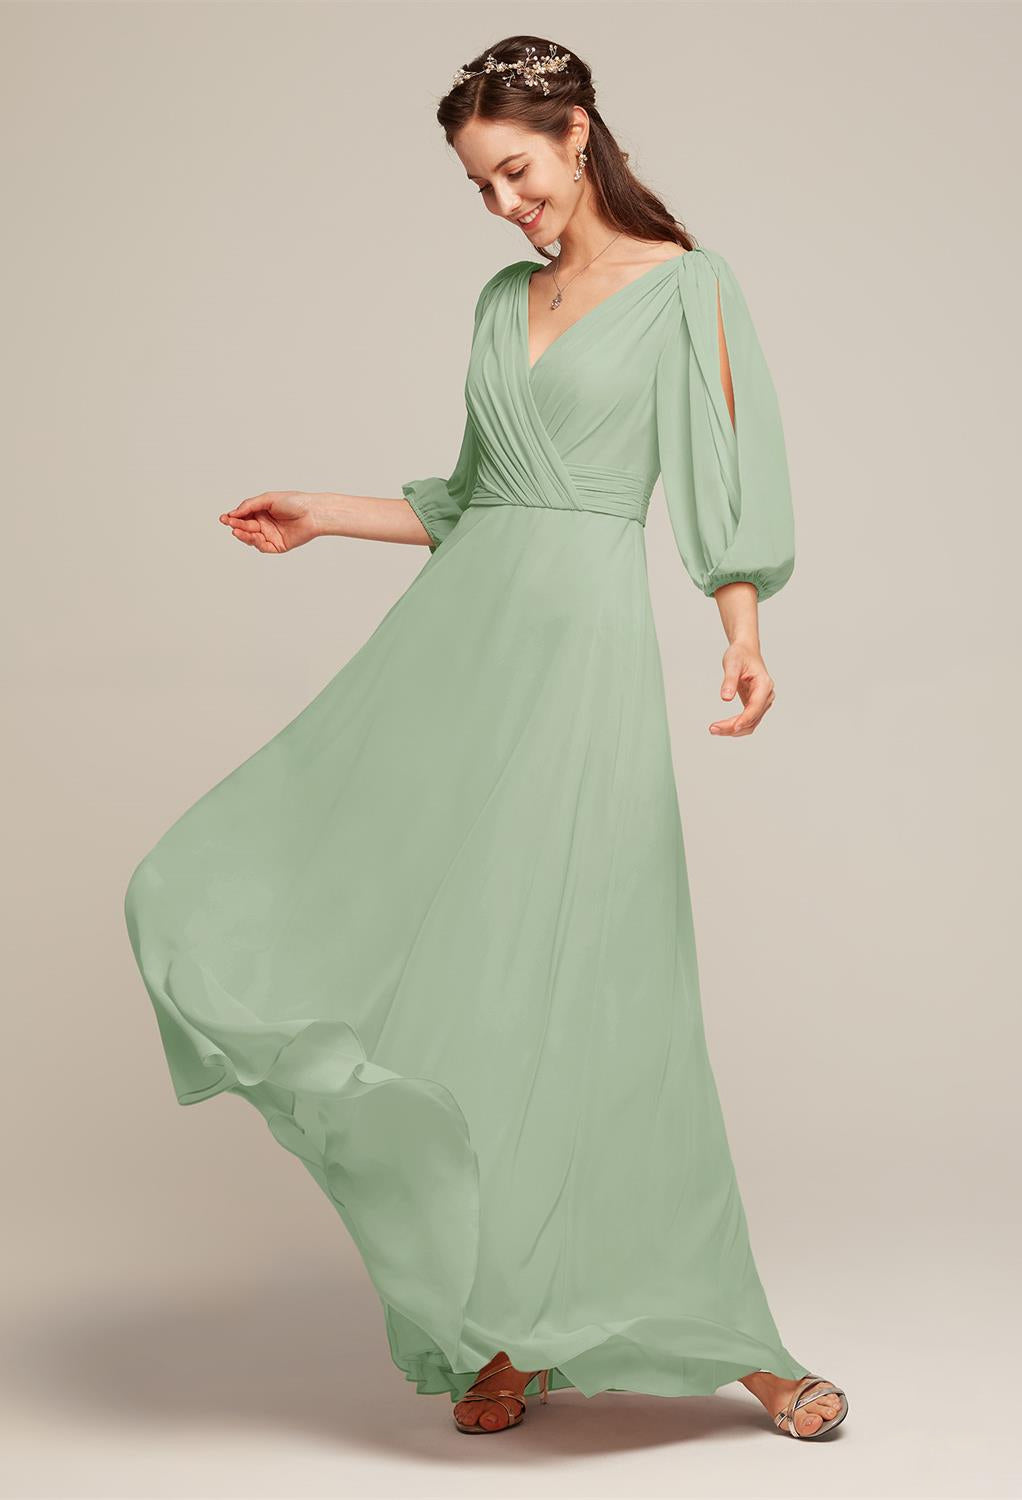 Bergamot Bridal's Polly - Chiffon Bridesmaid Dress - Off the Rack with a v - neck is available at a bridal shop.